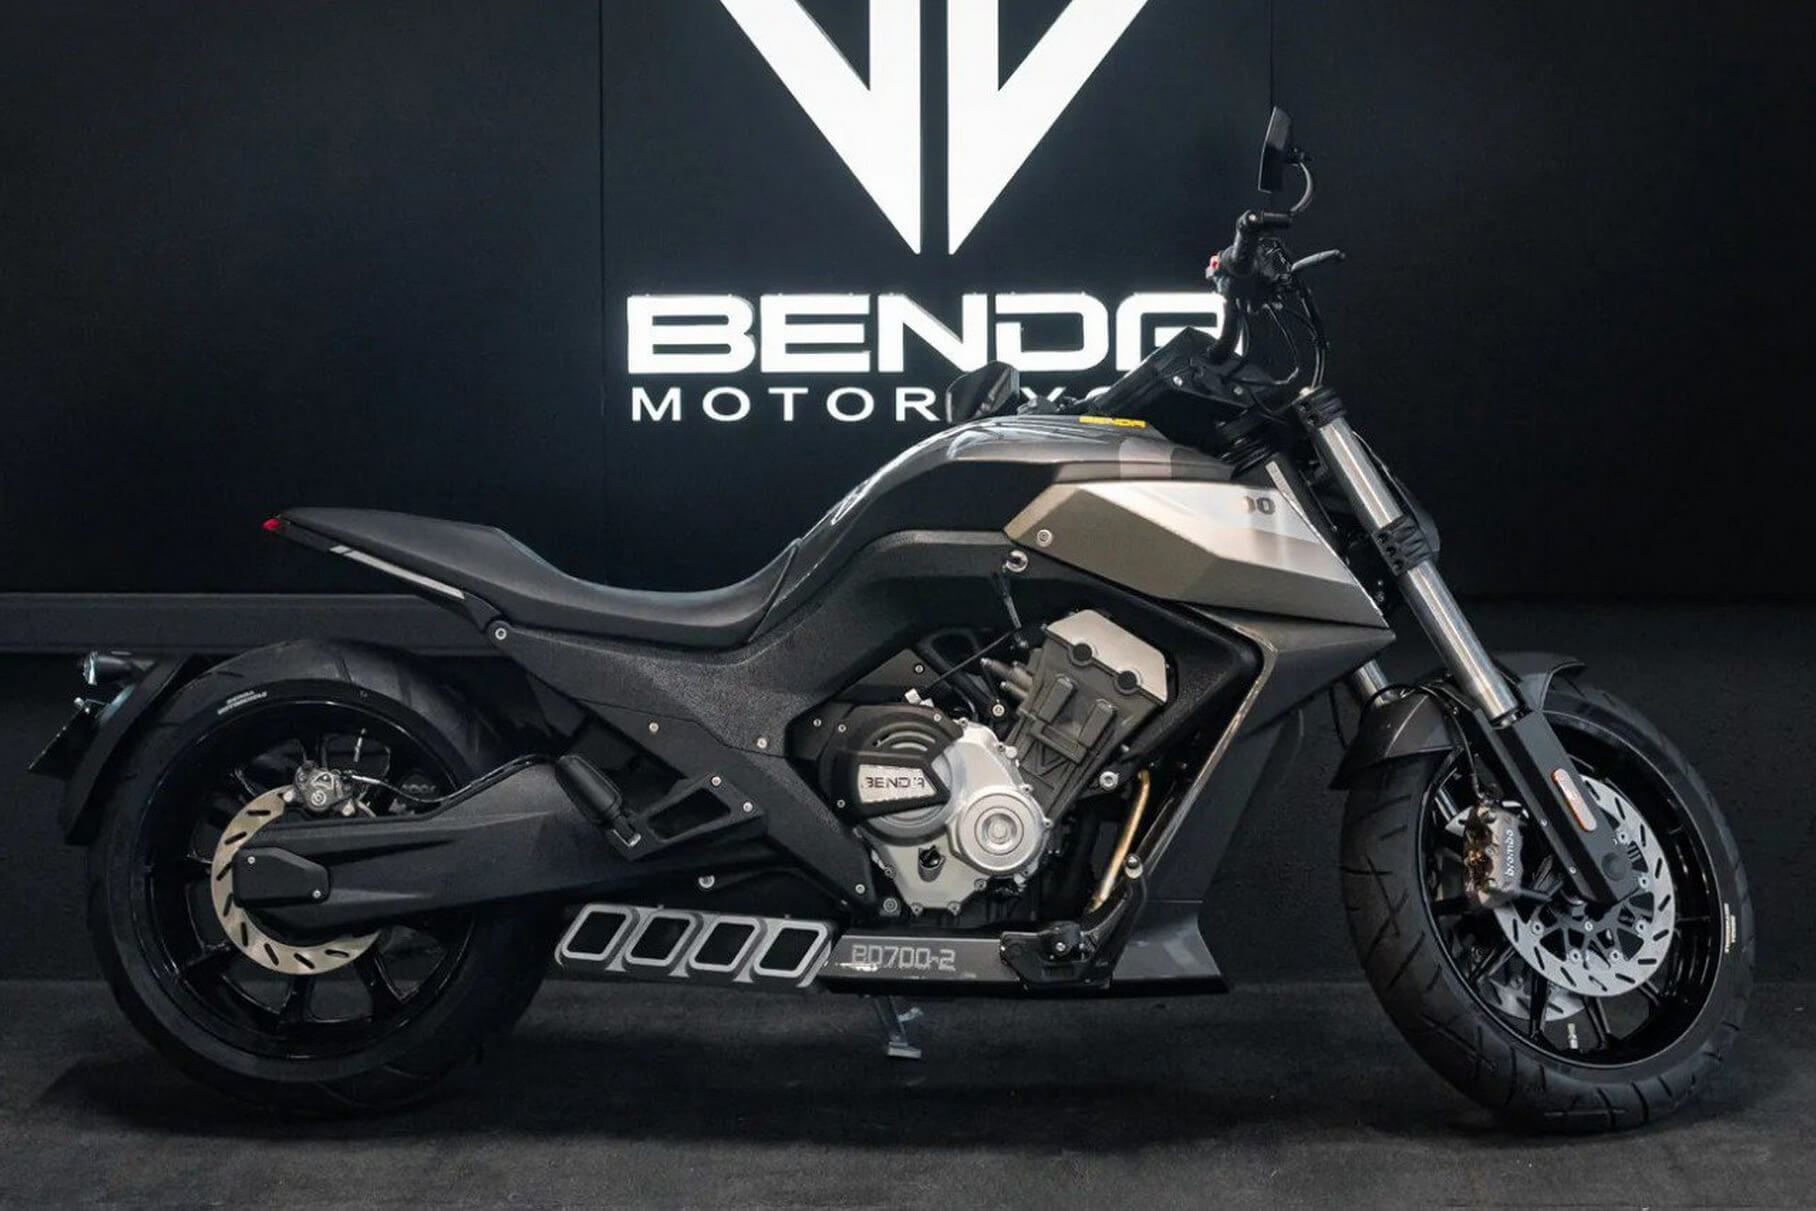 The Chinese have certified the latest heavy Benda motorcycle in Russia